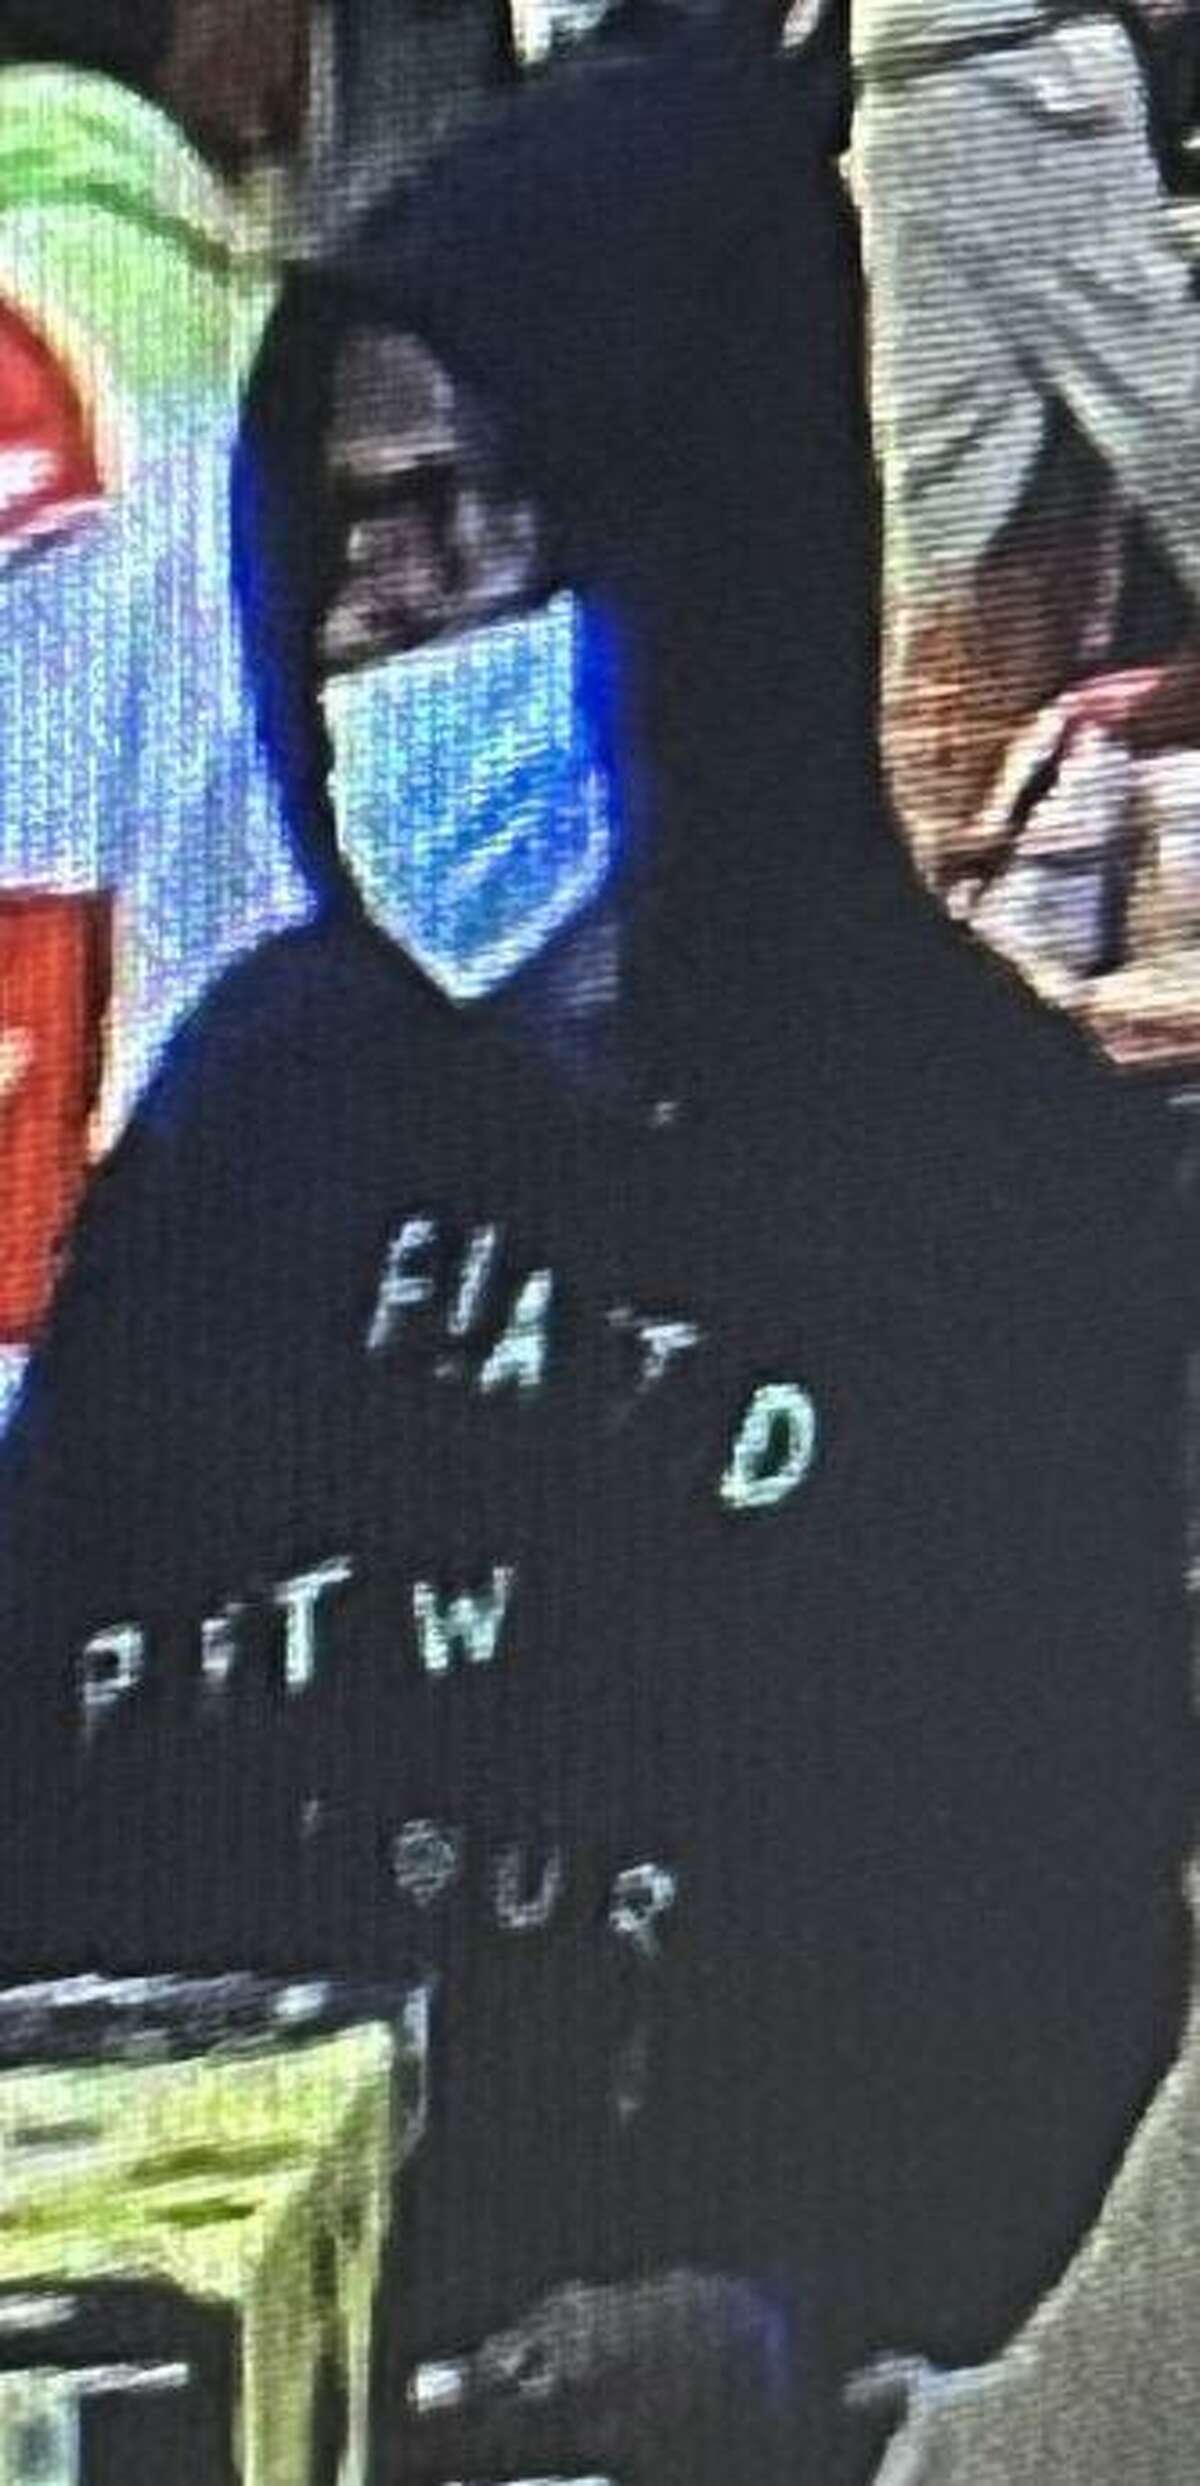 Police are attempting to identify this suspect who is accused of stealing $1,000 worth of tools from Home Depot on May 6. Witnesses said the suspect was about 40 years old and wore a Panic! at the Disco “Pray for the Wicked” tour hoodie. He fled in an older white Subaru Outback.